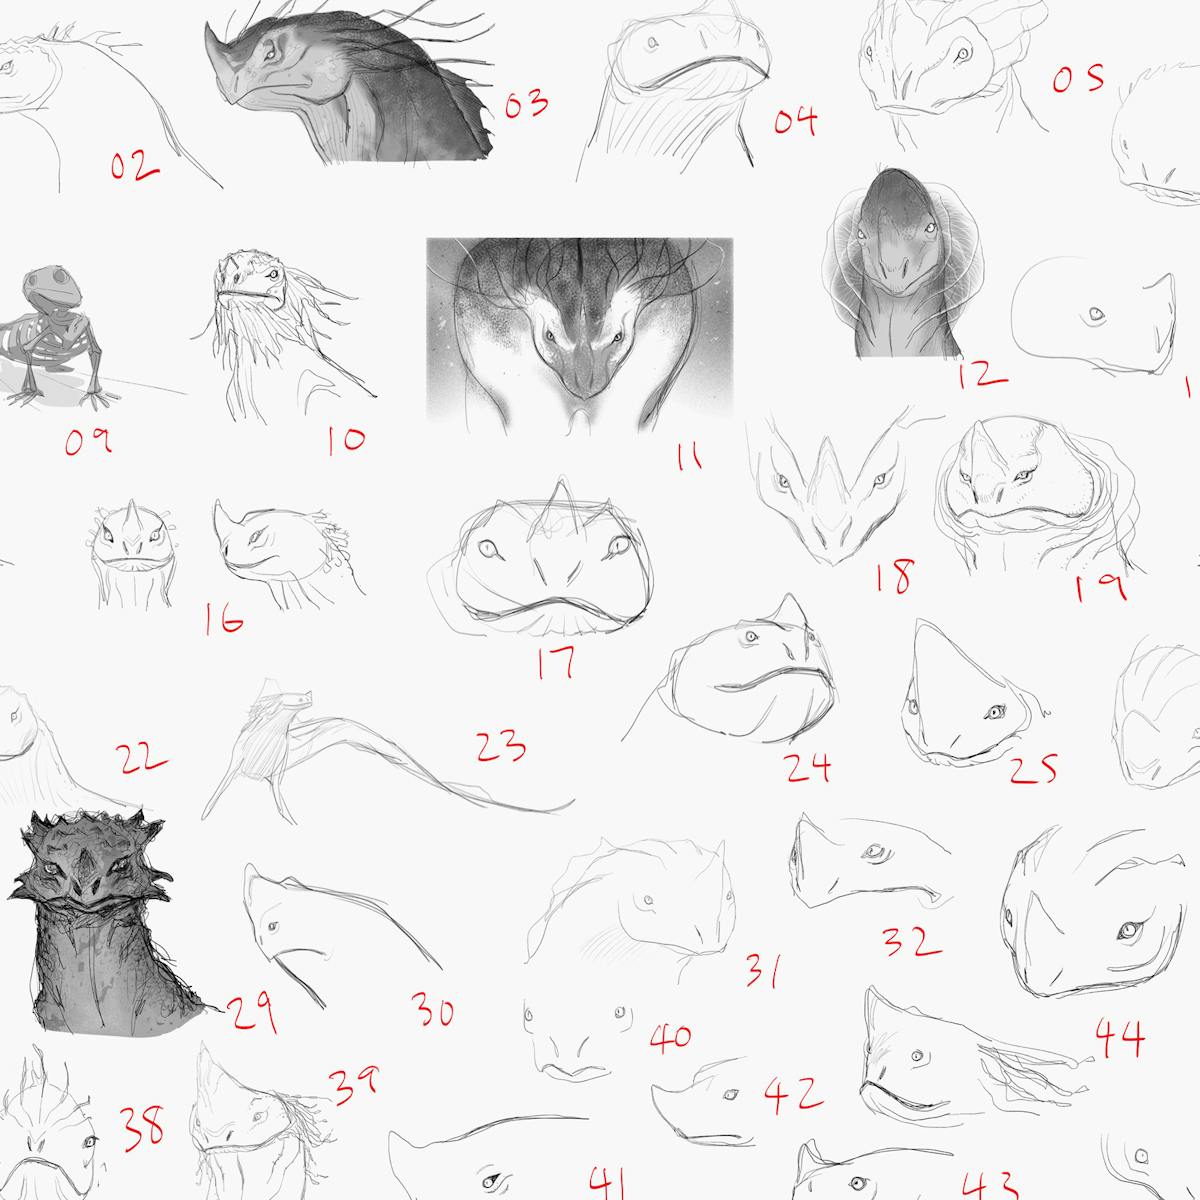 Some black-and-white sketches of the creatures of The Sea Beast, numbered with red font.